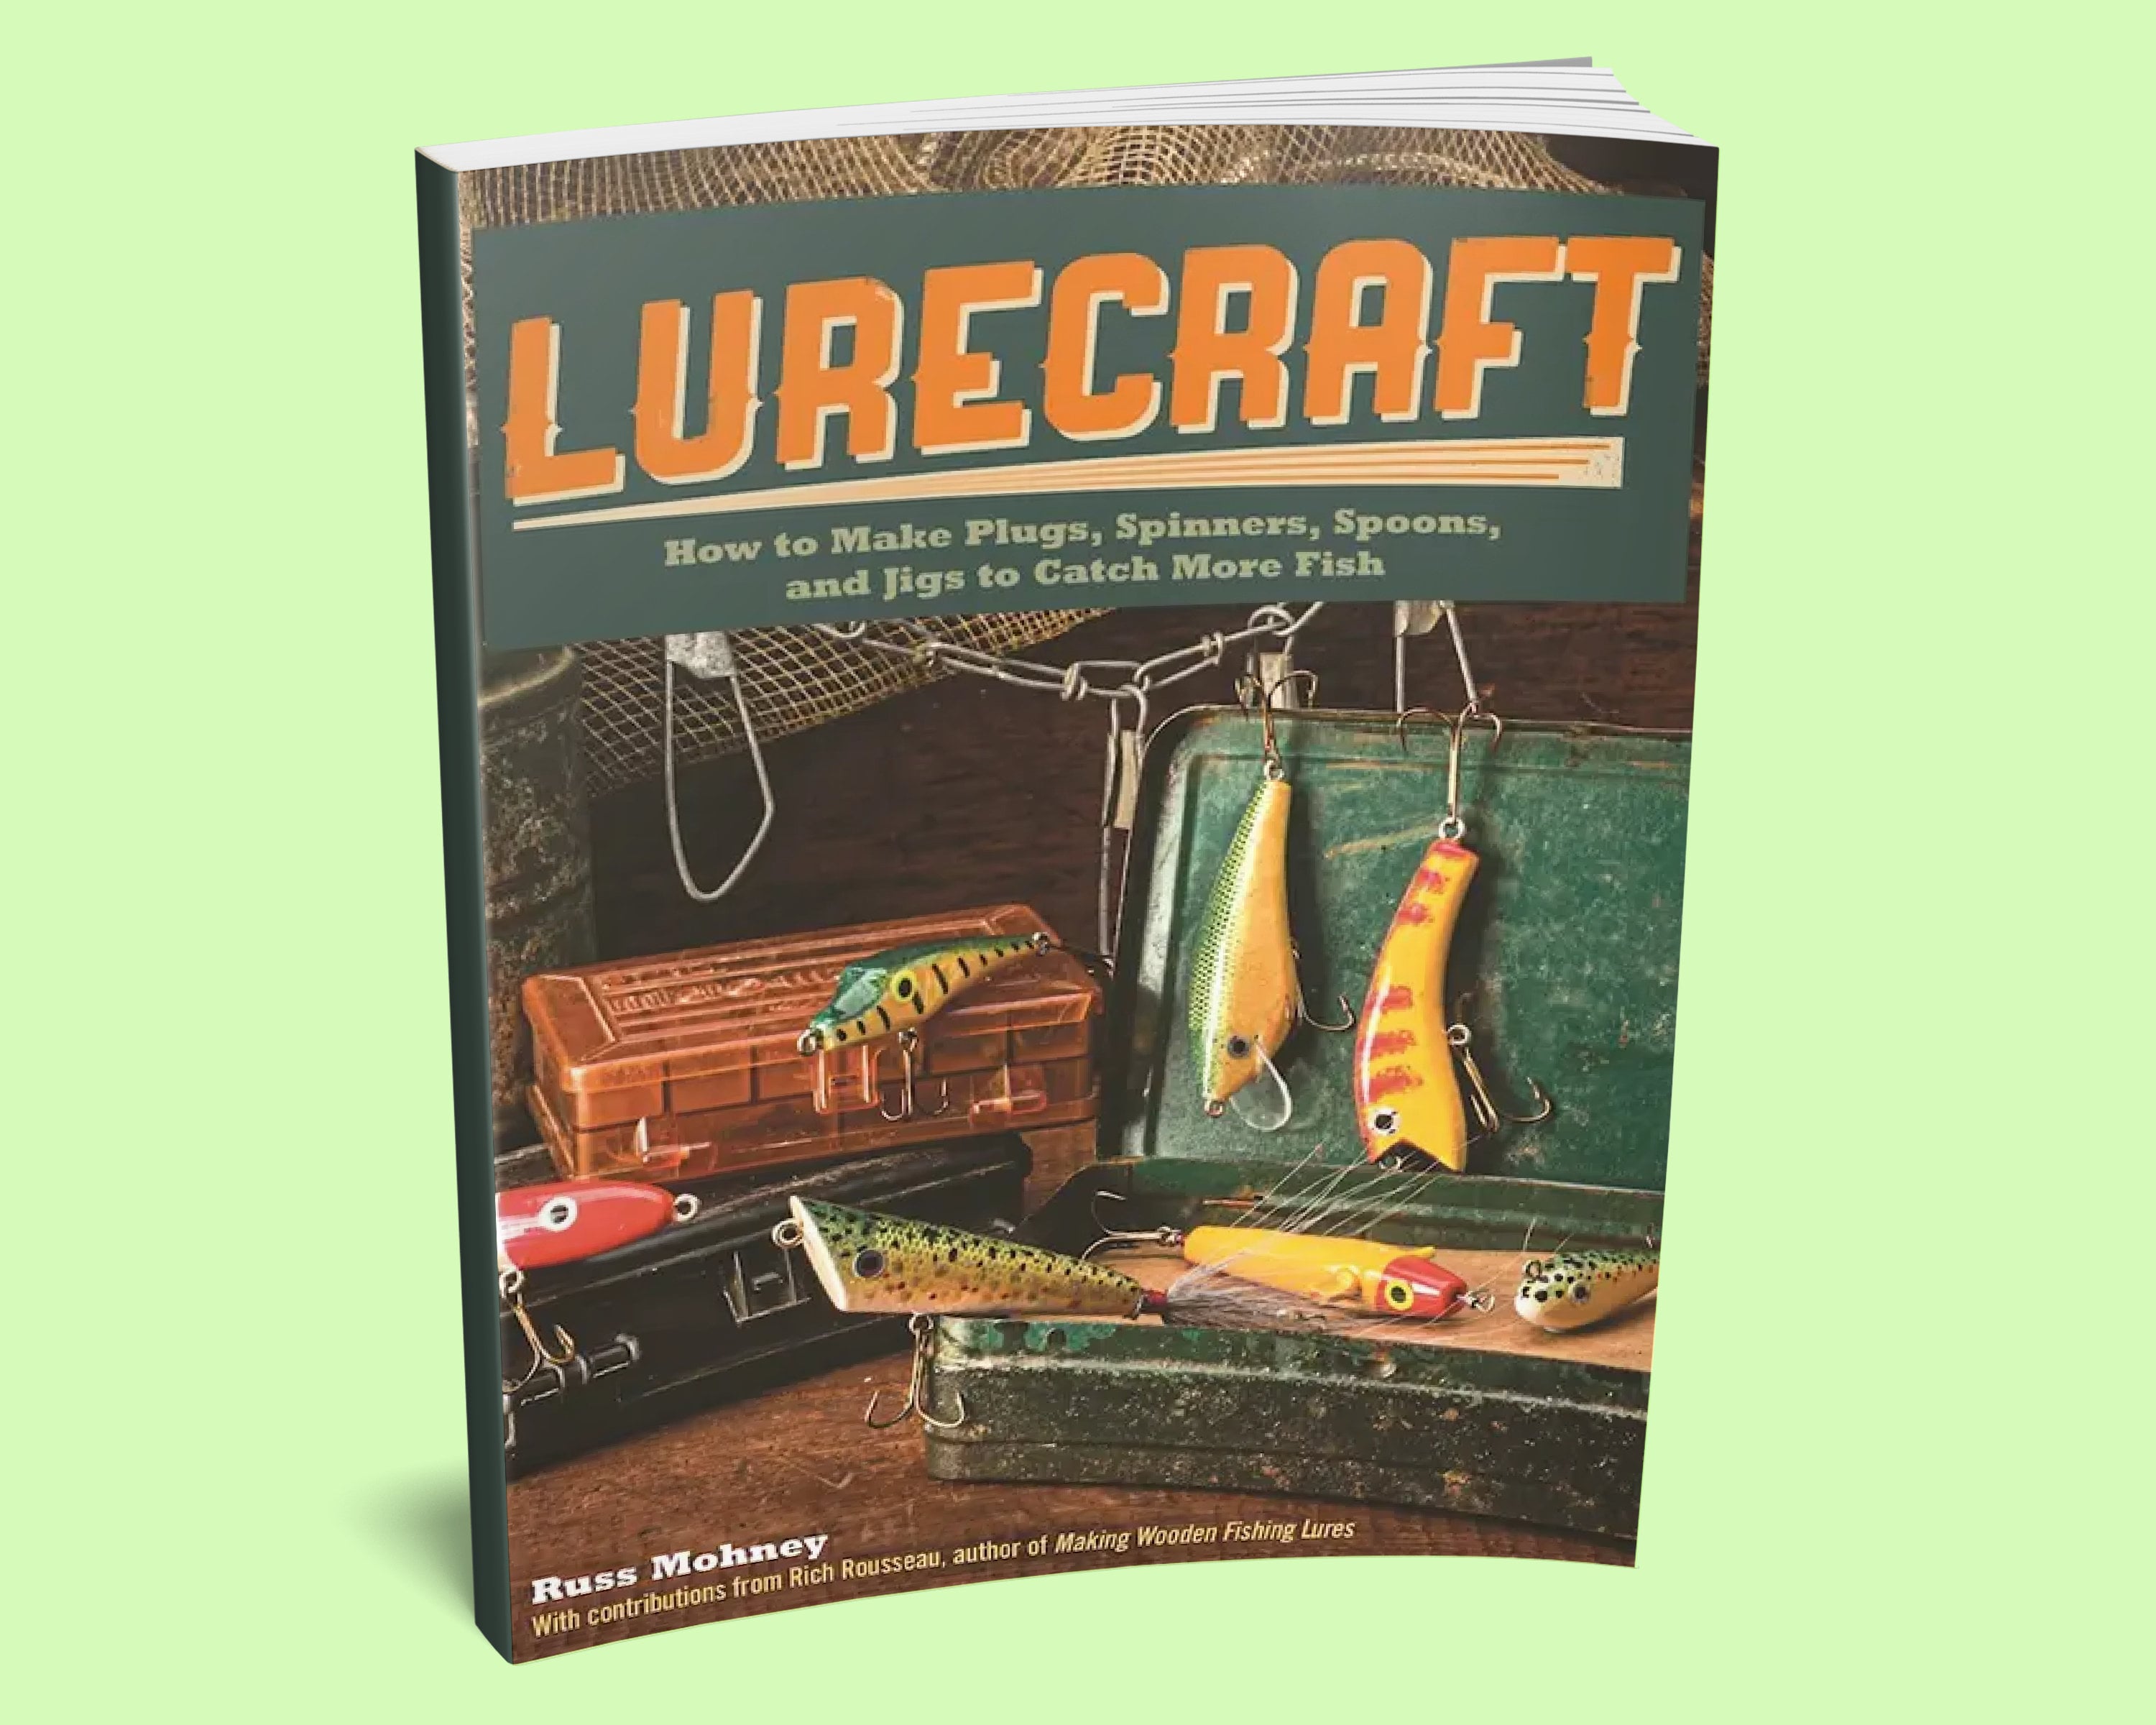 Book: Lurecraft Book How to Make Fishing Plugs, Spinners, Spoons